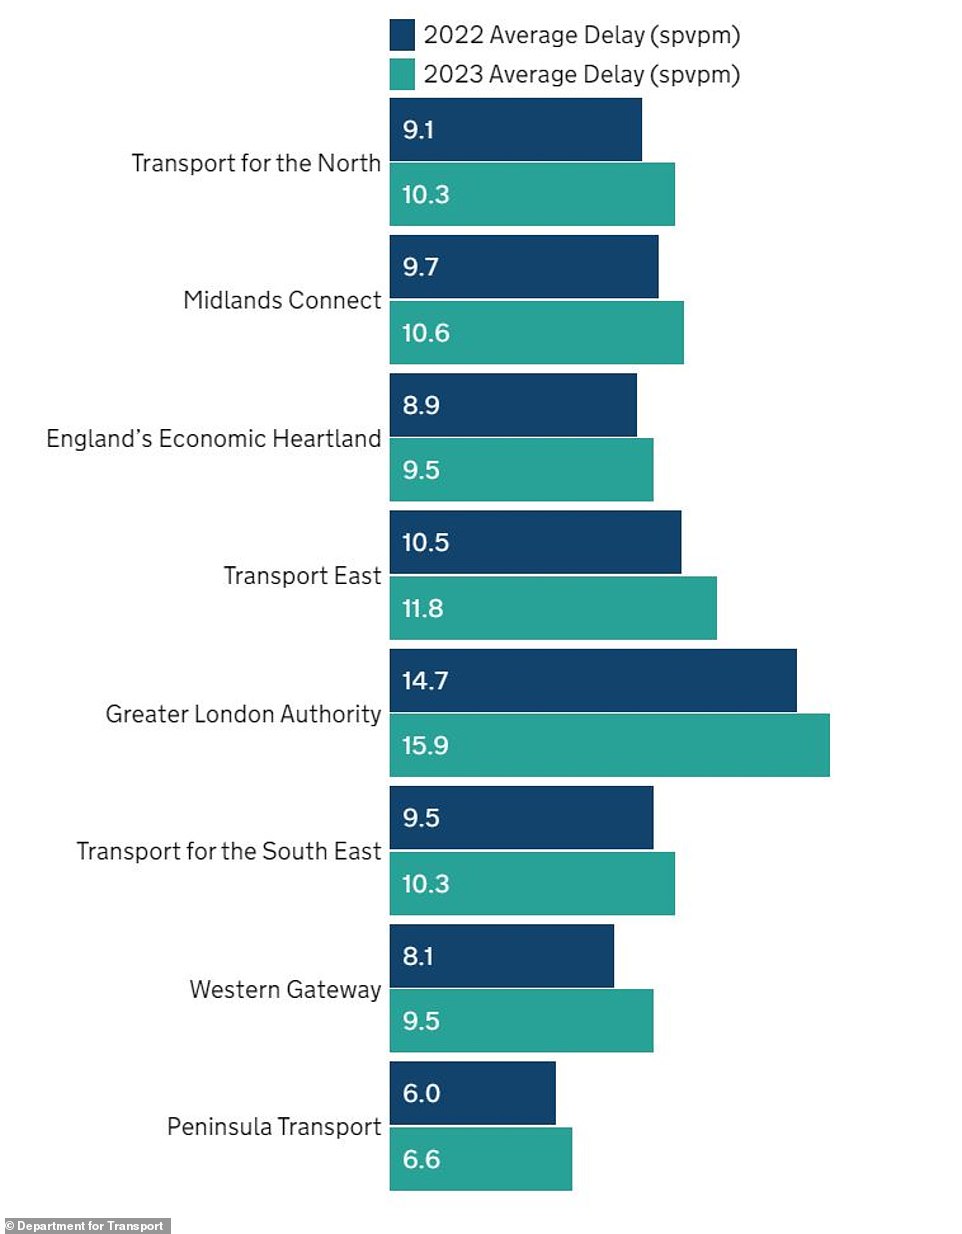 Looking at the regional breakdown, year-over-year traffic delays have affected motorists in the West the most.  The average deceleration there rose from 8.1 seconds per mile in 2022 to 9.5 seconds last year – an increase of 17 percent